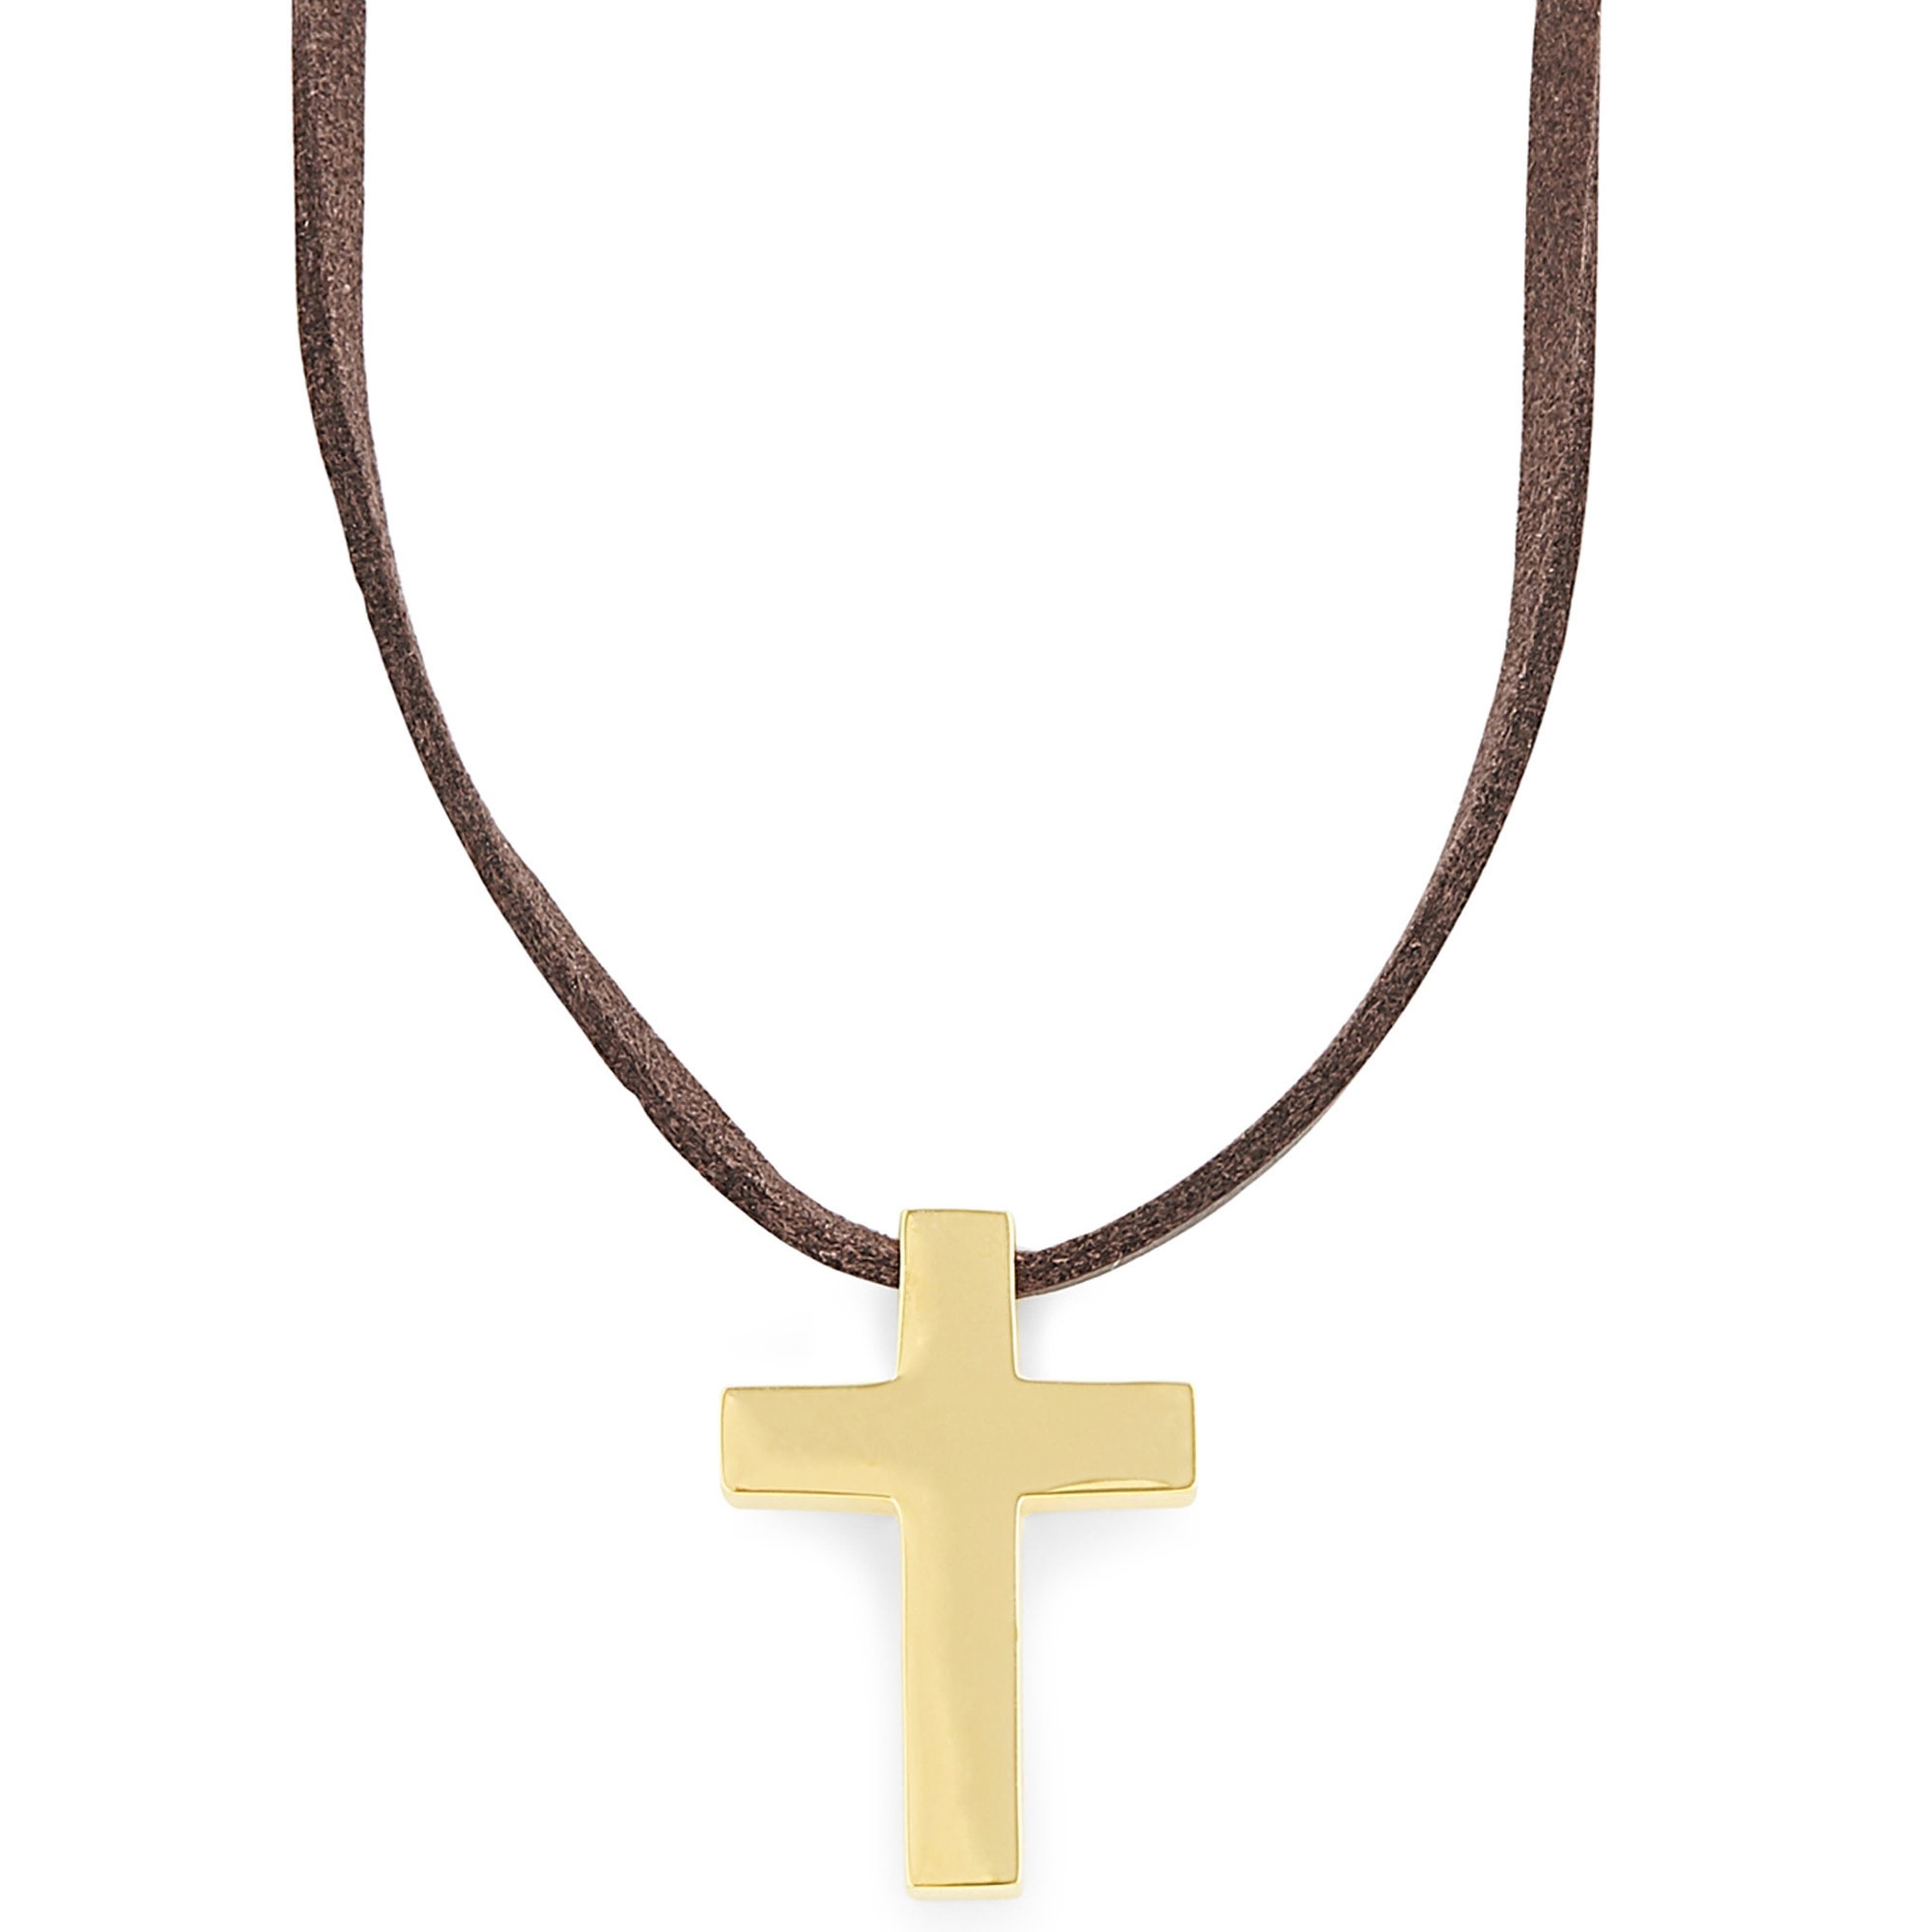 The Son Gold-Tone Cross Leather Iconic Necklace